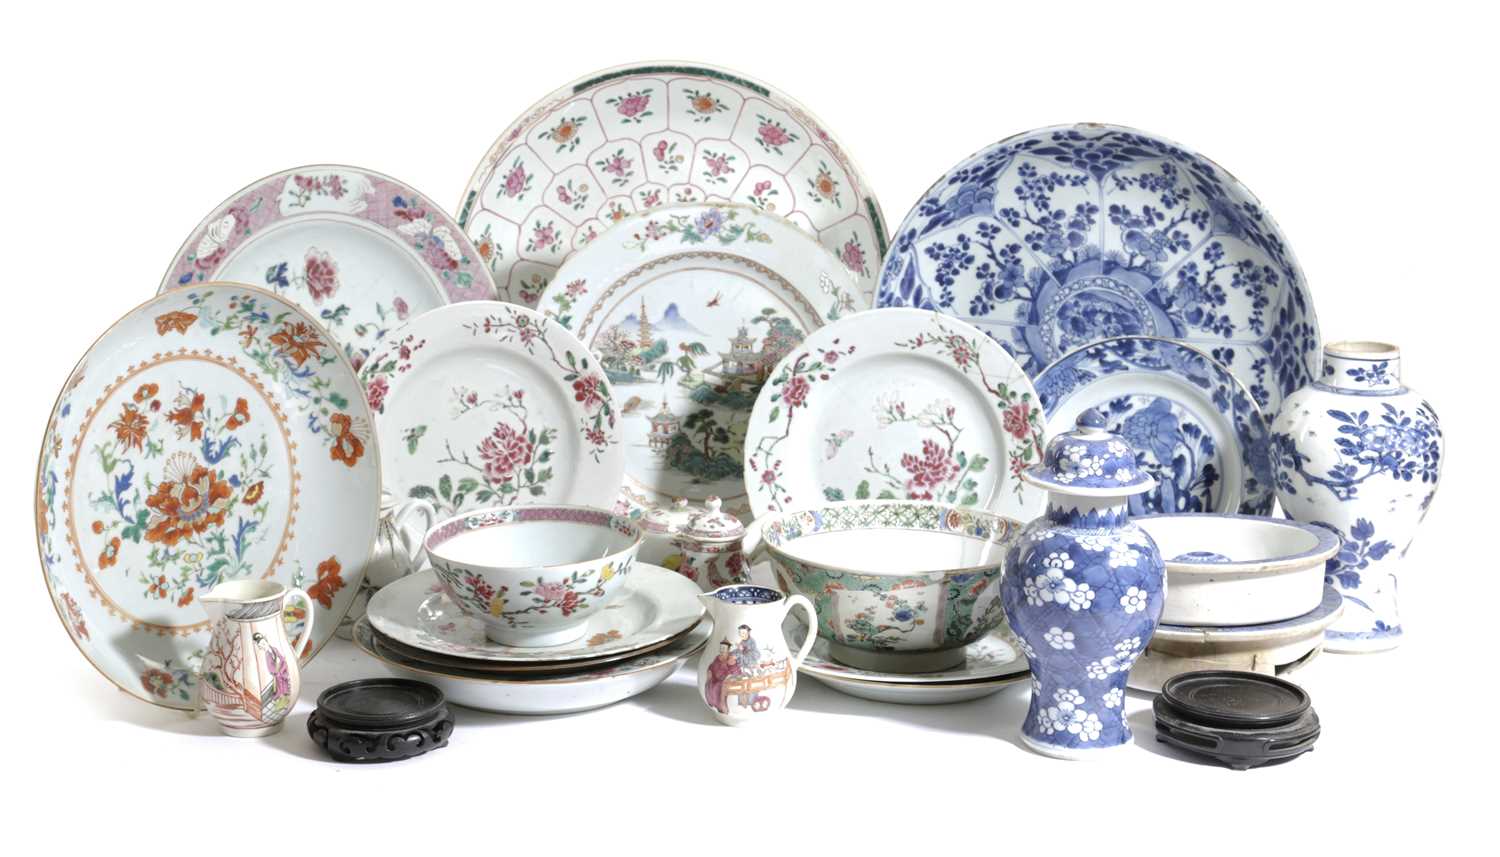 A COLLECTION OF CHINESE EXPORT PORCELAIN 19TH CENTURY including: famille rose chargers, plates, a - Image 2 of 2